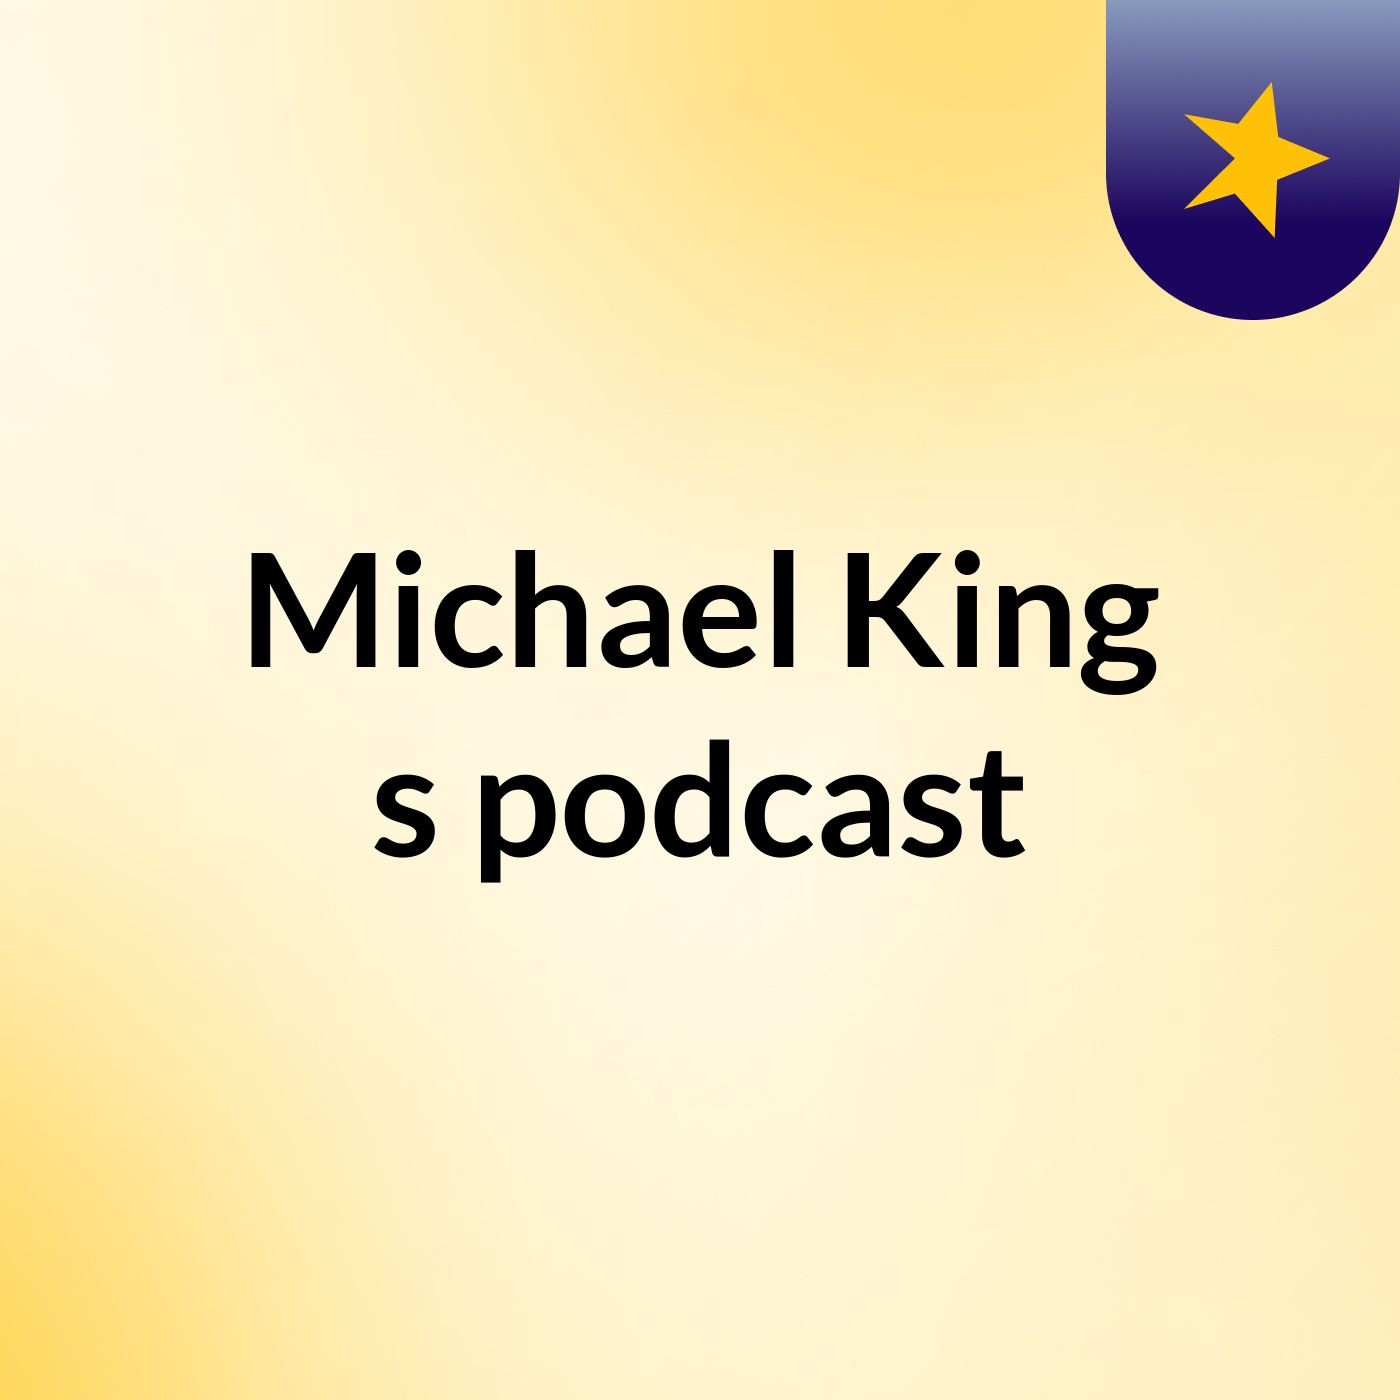 Episode 2 - Michael King's podcast